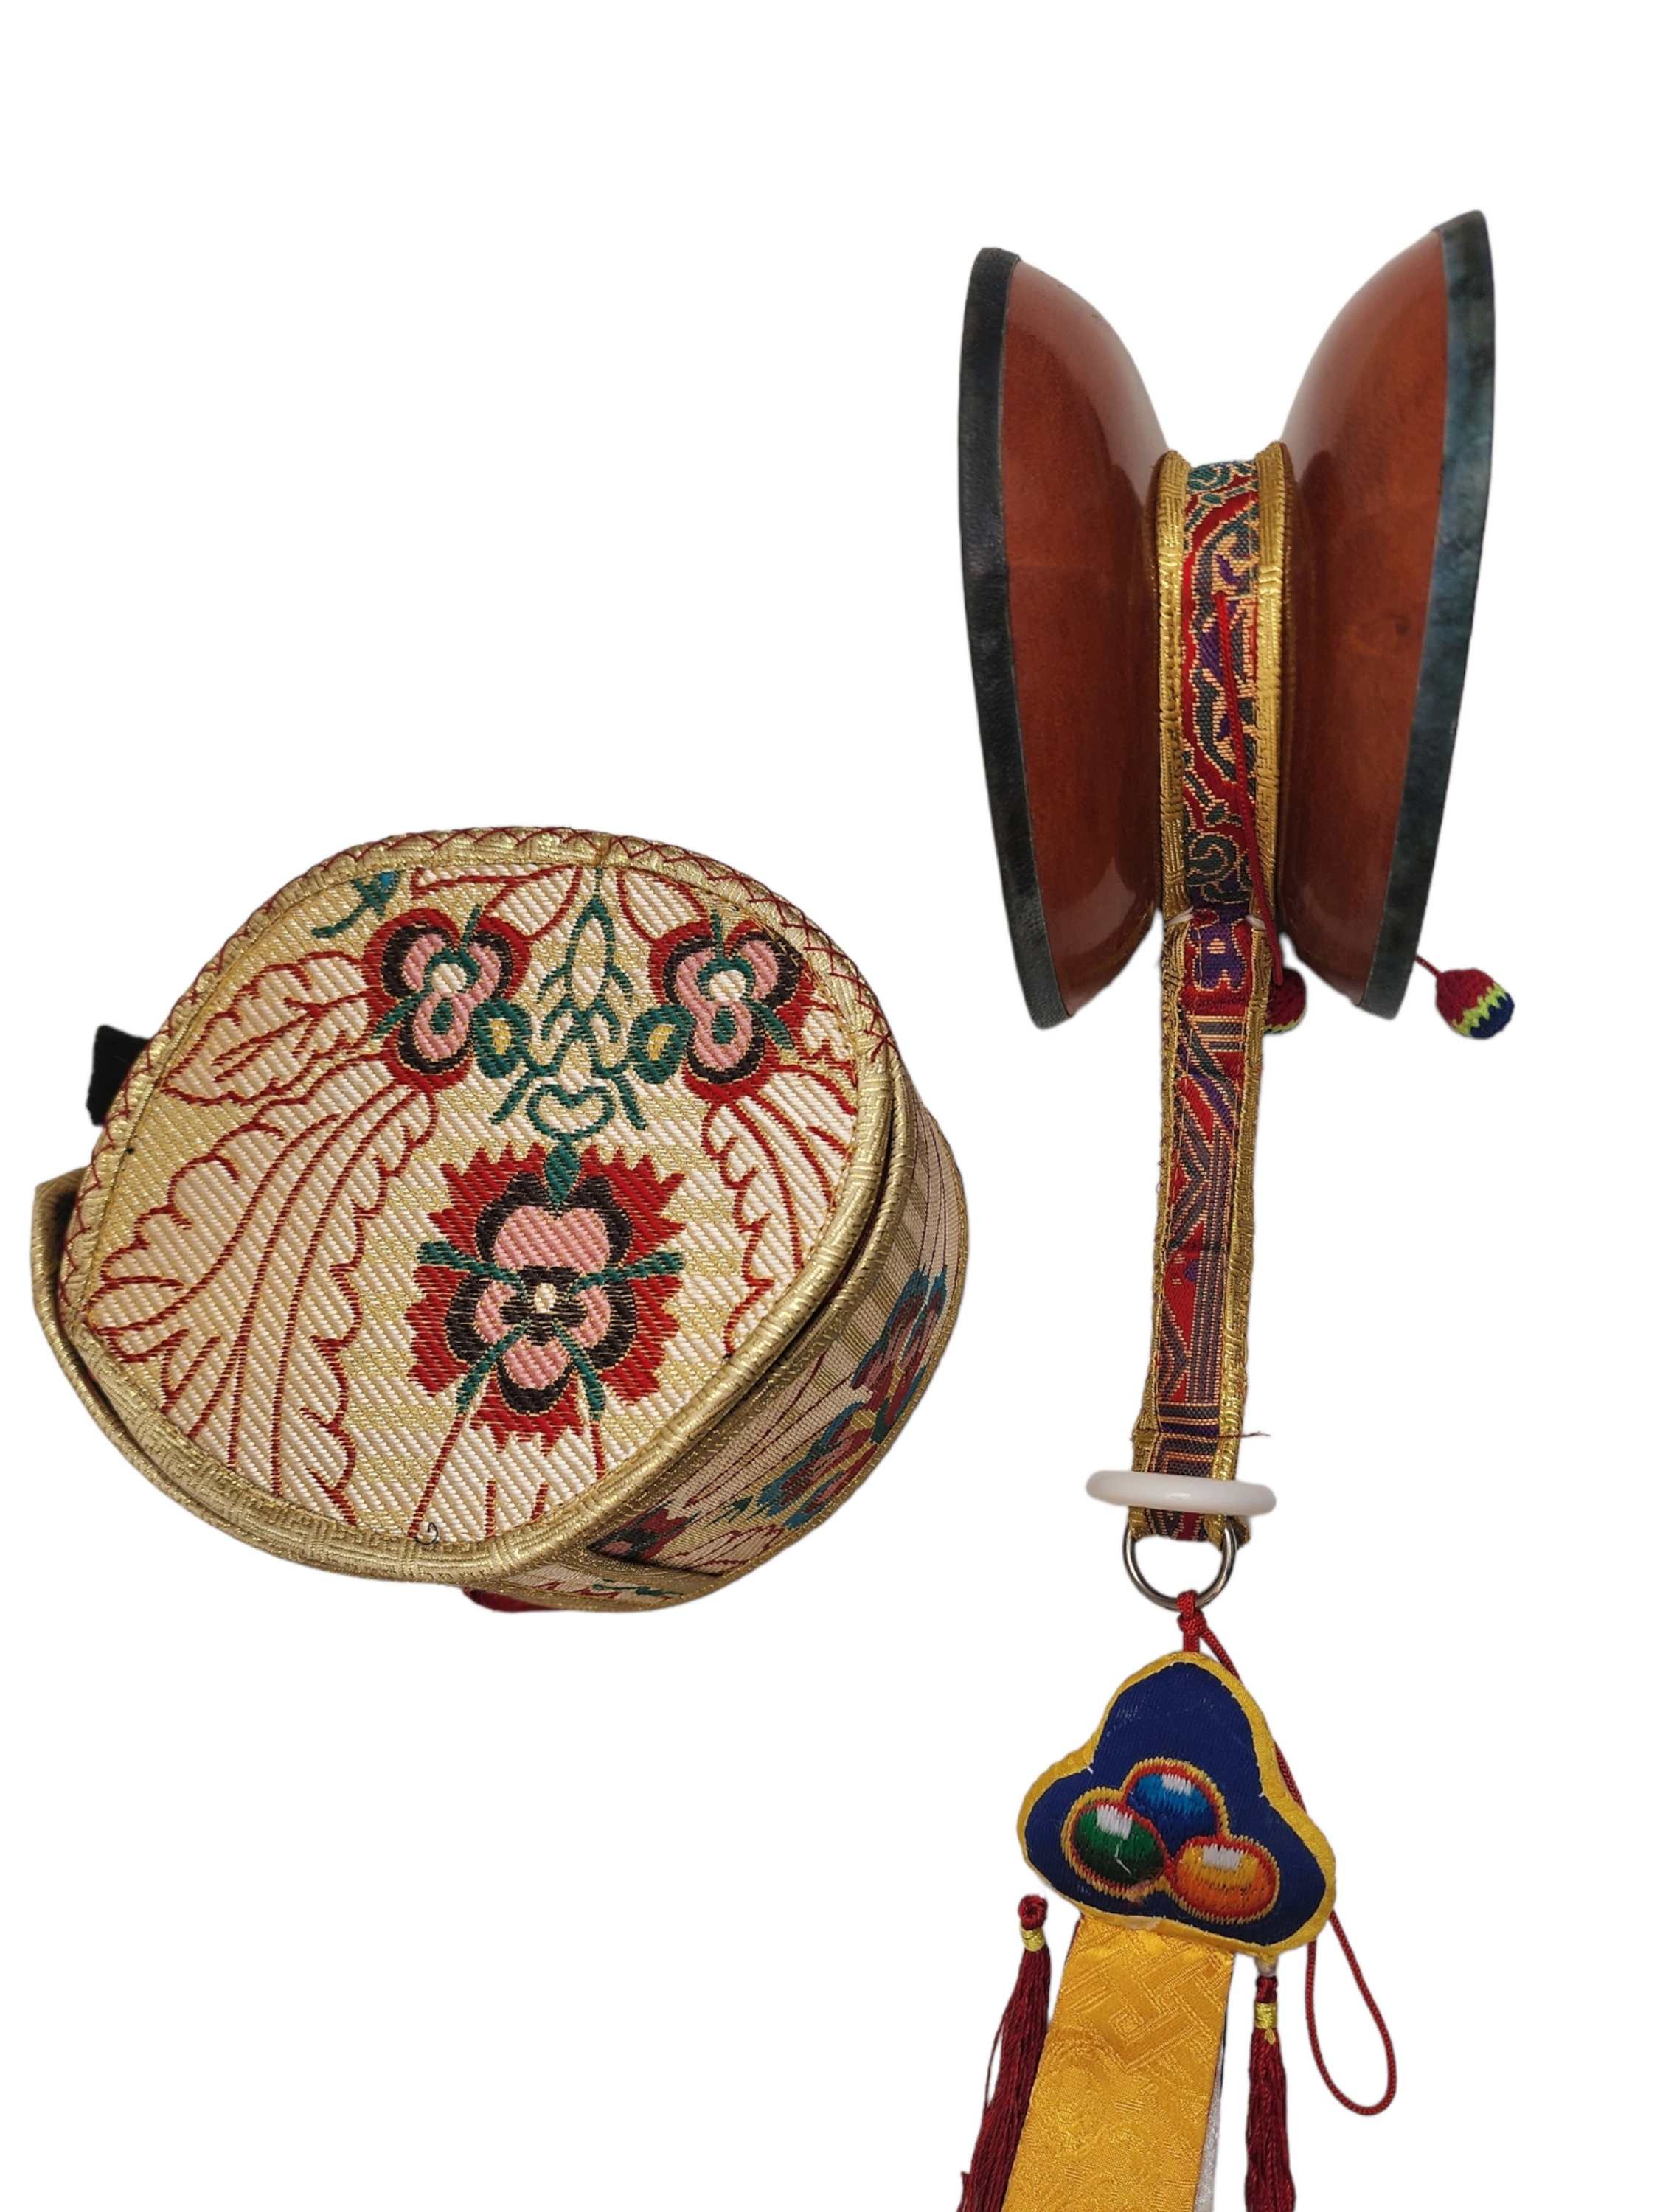 Chod Damru, The Tibetan chod Damaru, medium Quality A Traditional Musical Instrument From Tibet, high Quality Wood With Brocade Cover And Tail